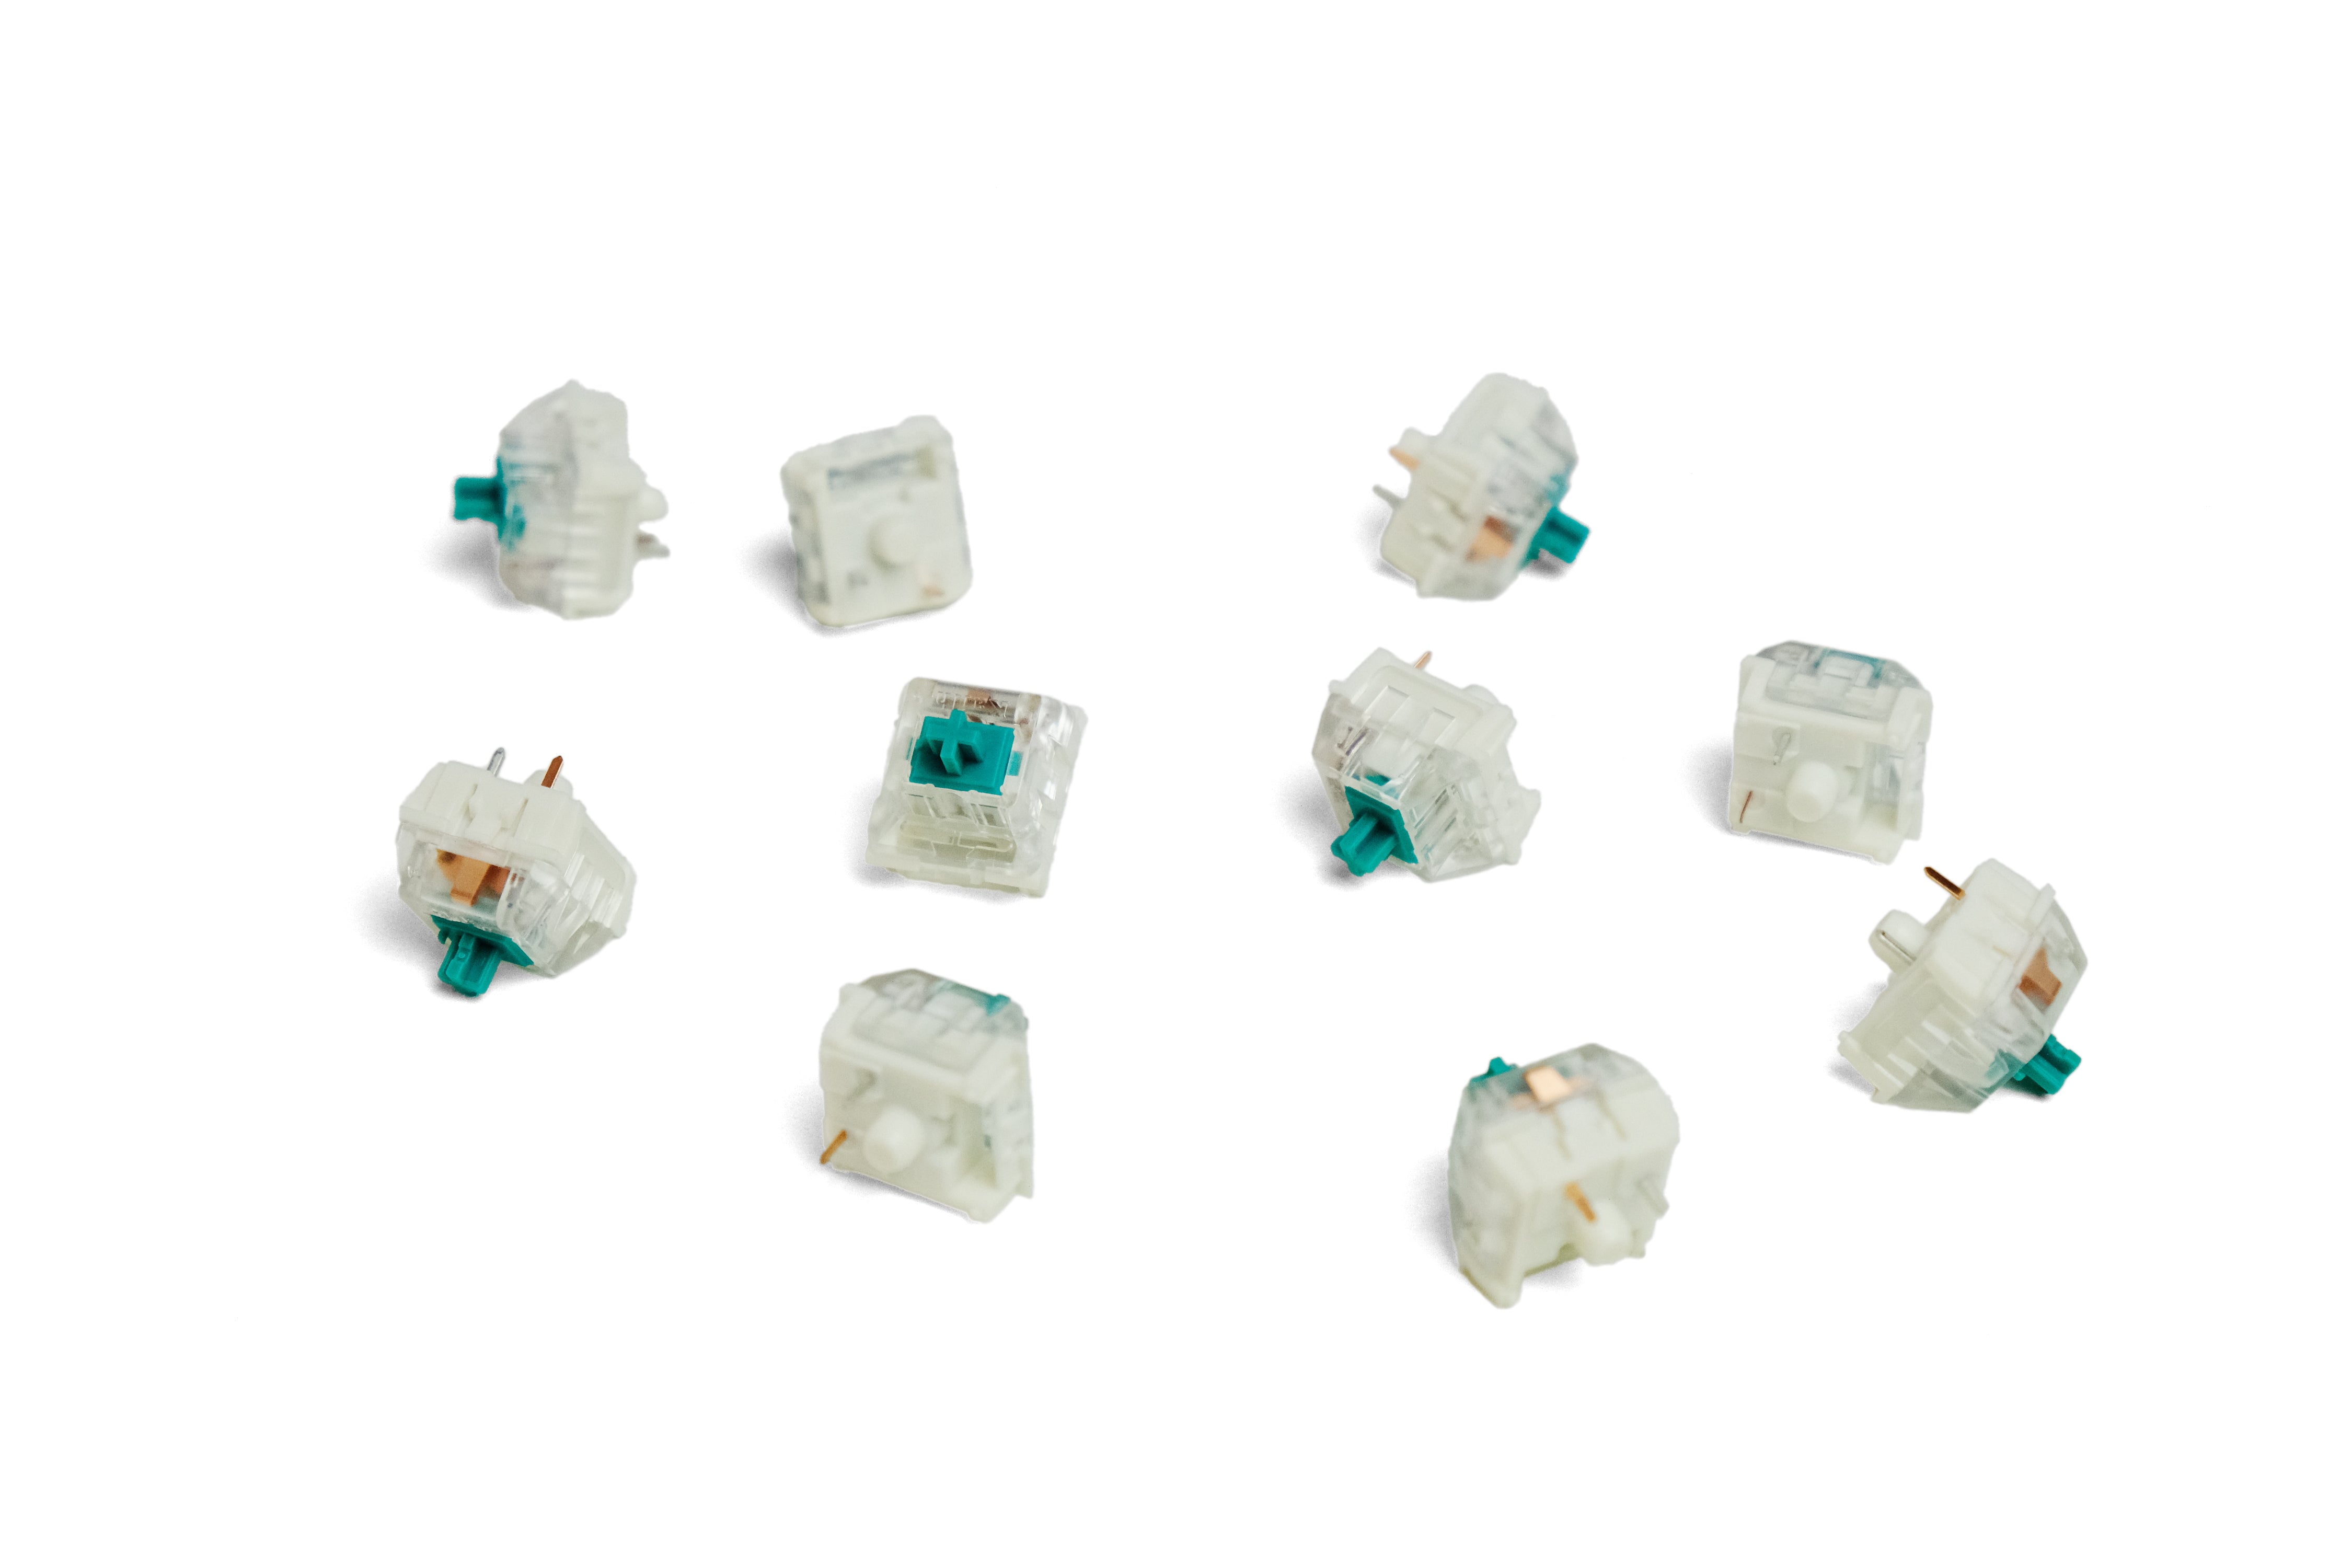 Group of Kailh Pro Light Green Clicky Switches